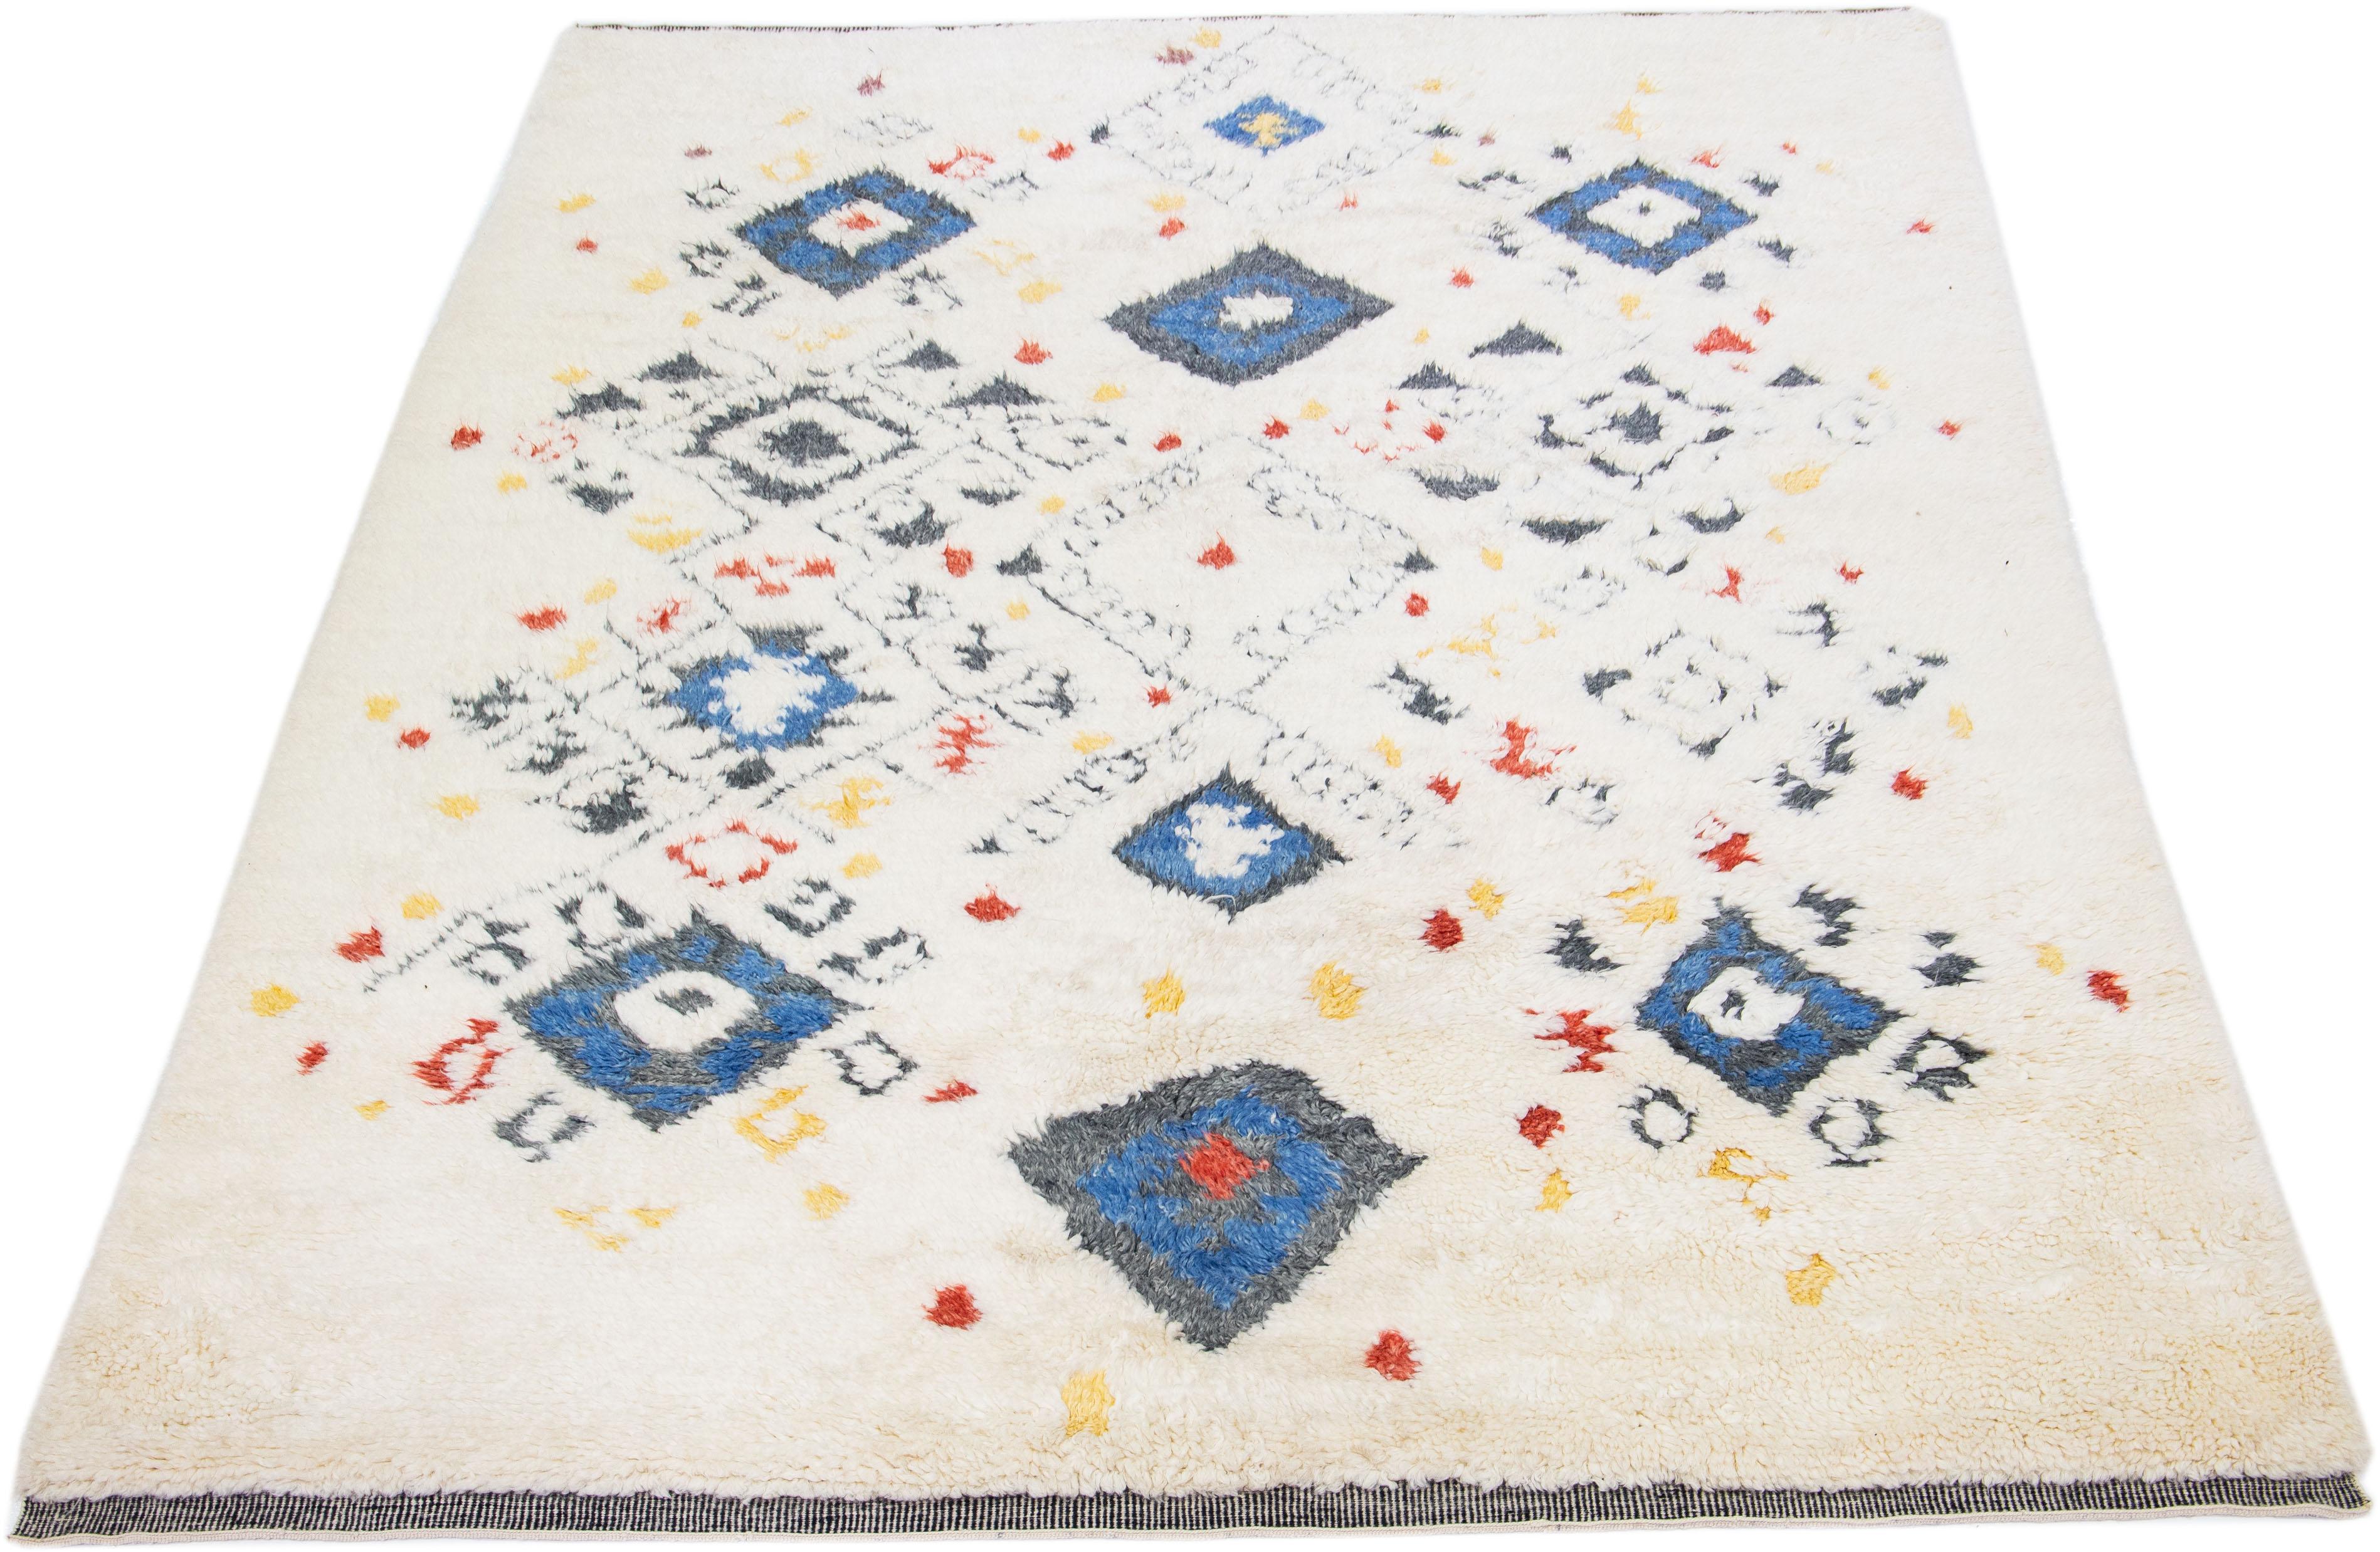 Beautiful Moroccan-style handmade wool rug with an Ivory color field. This Modern rug has gray, blue, yellow, and red accents featuring a gorgeous all-over geometric tribal design.

This rug measures: 9' x 12'.

Our rugs are professional